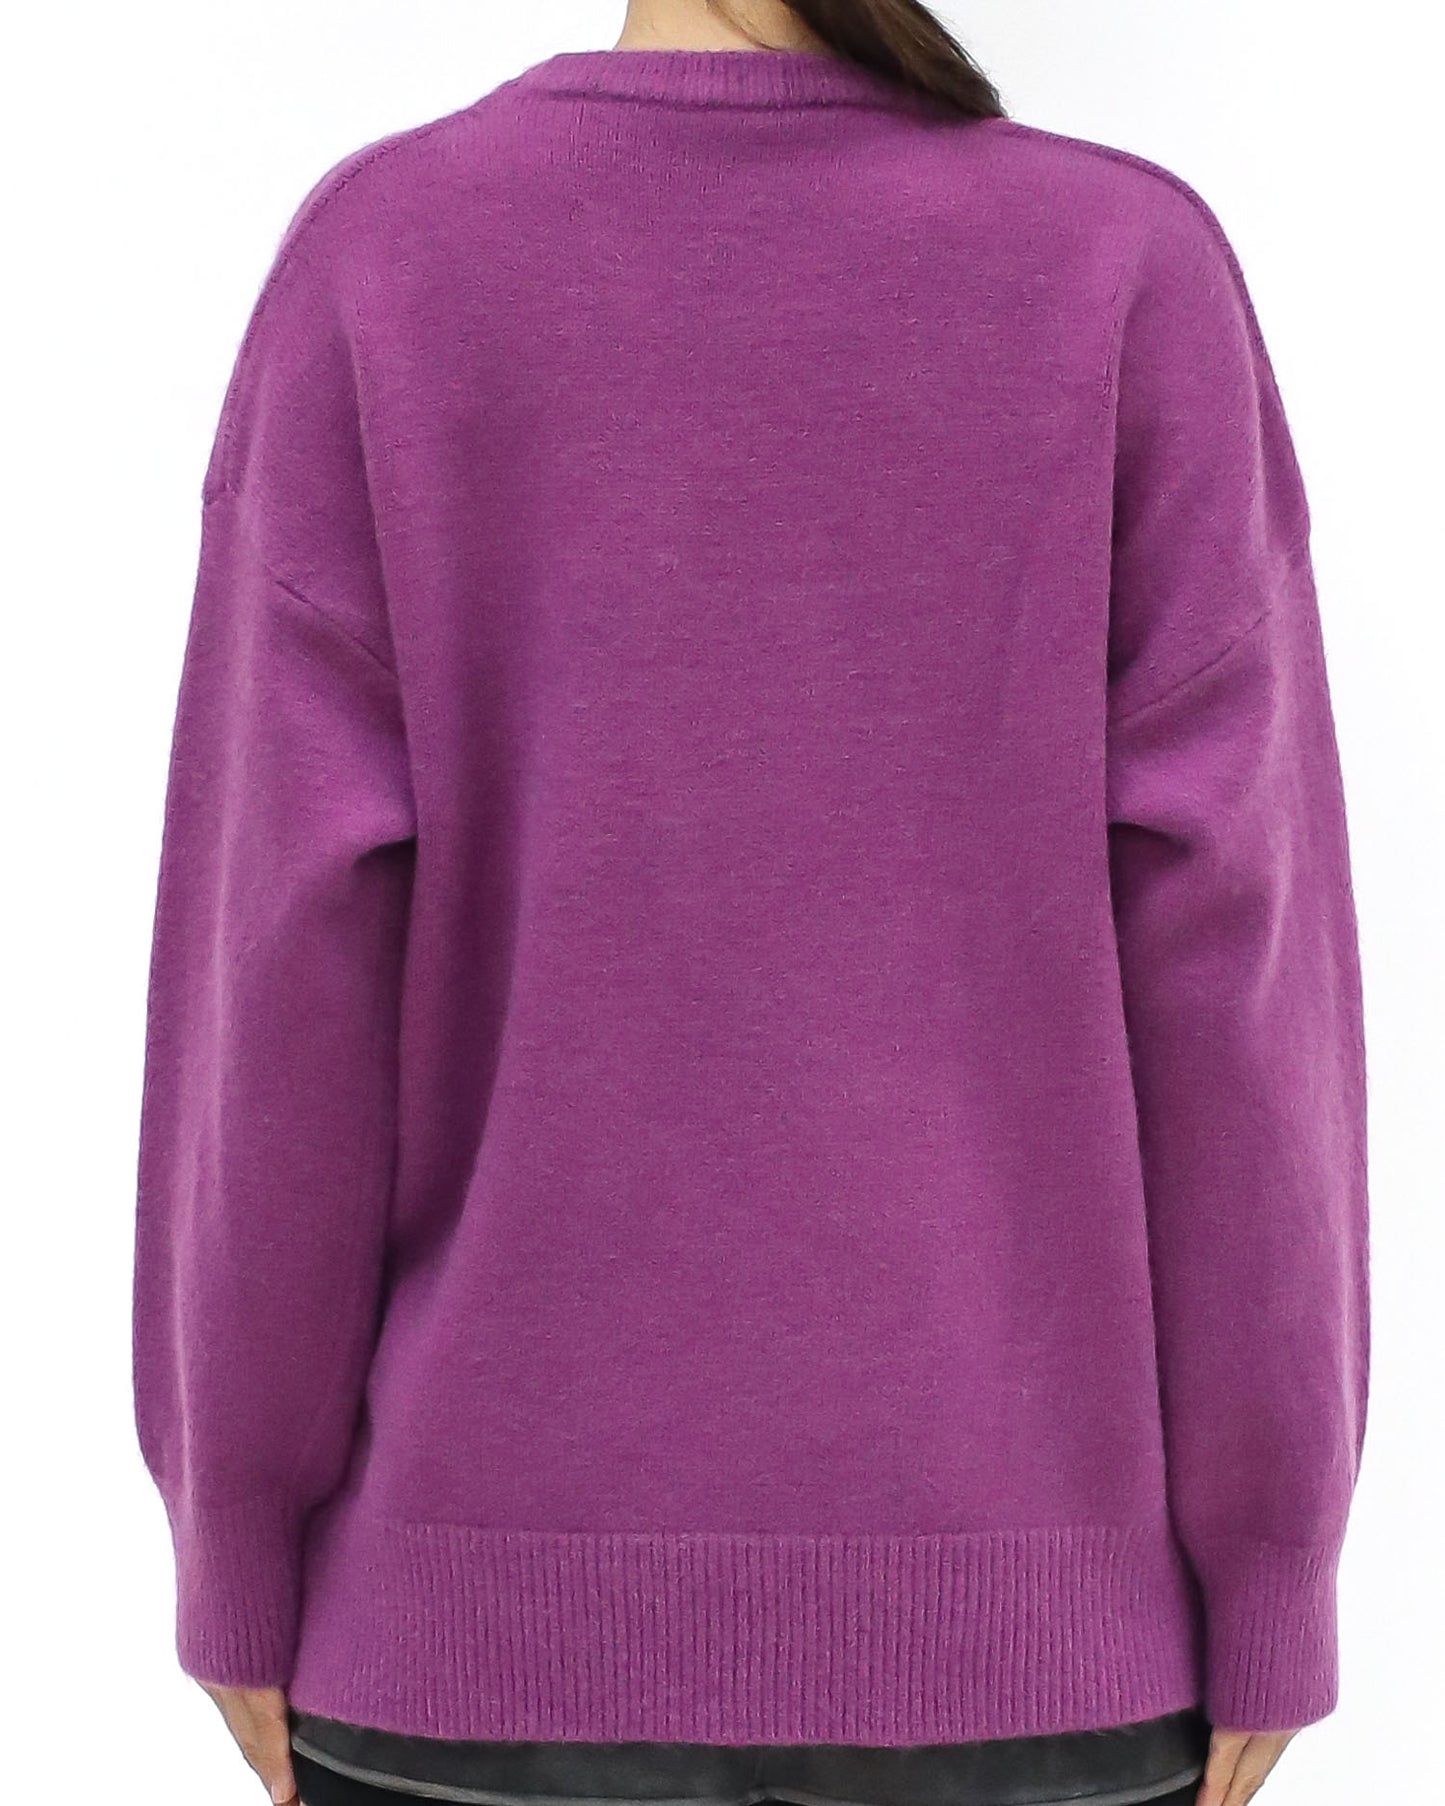 purple basic knitted top